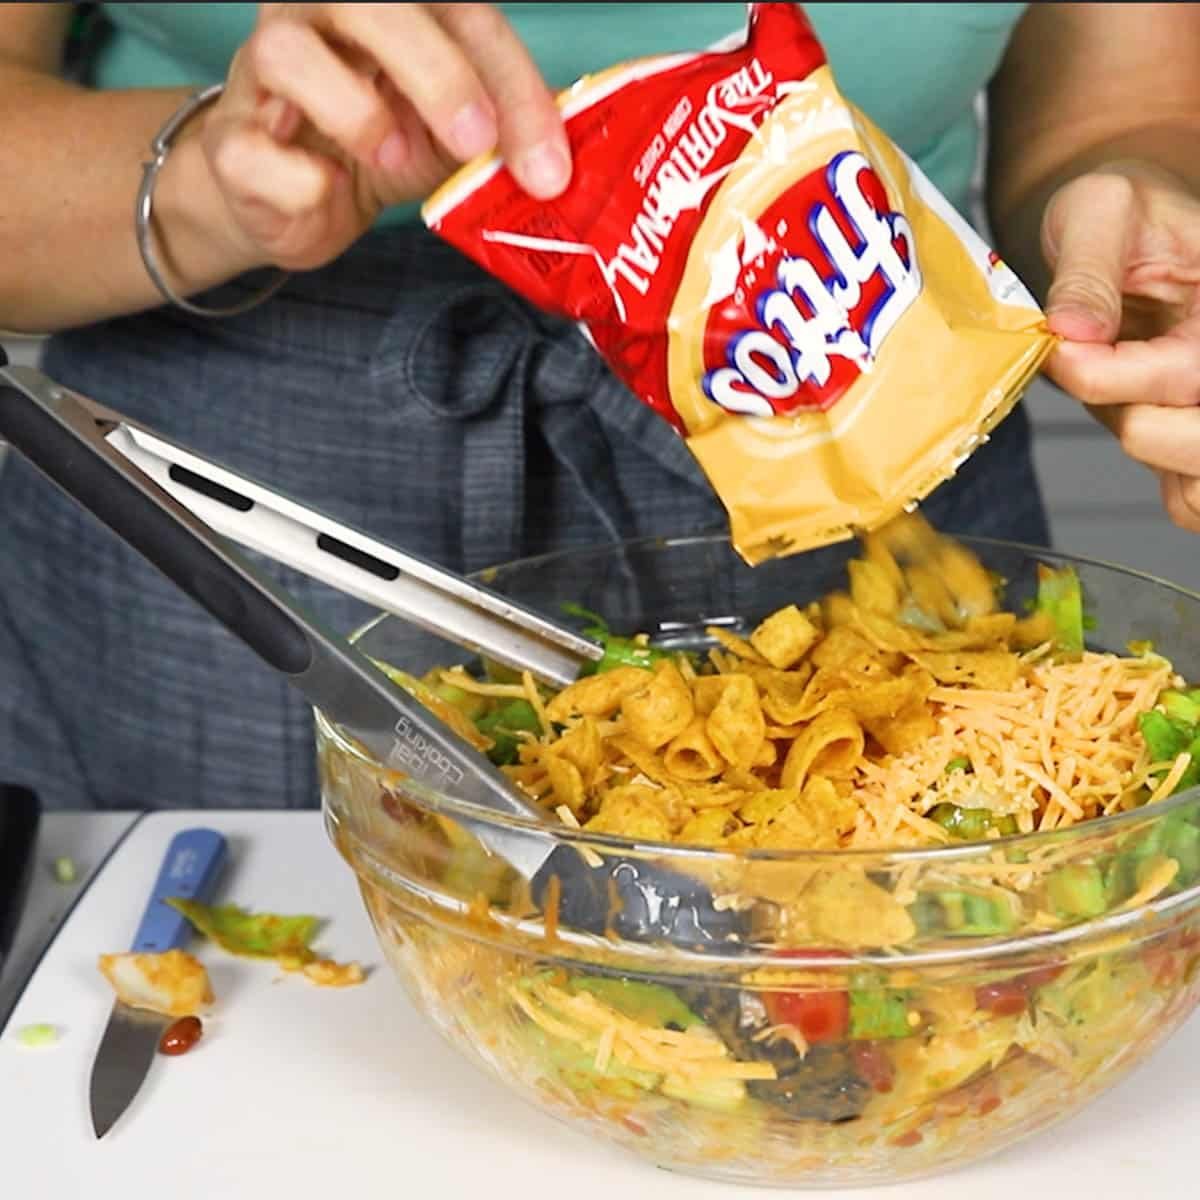 Frito Corn Chips being poured into salad bowl over salad ingredients 